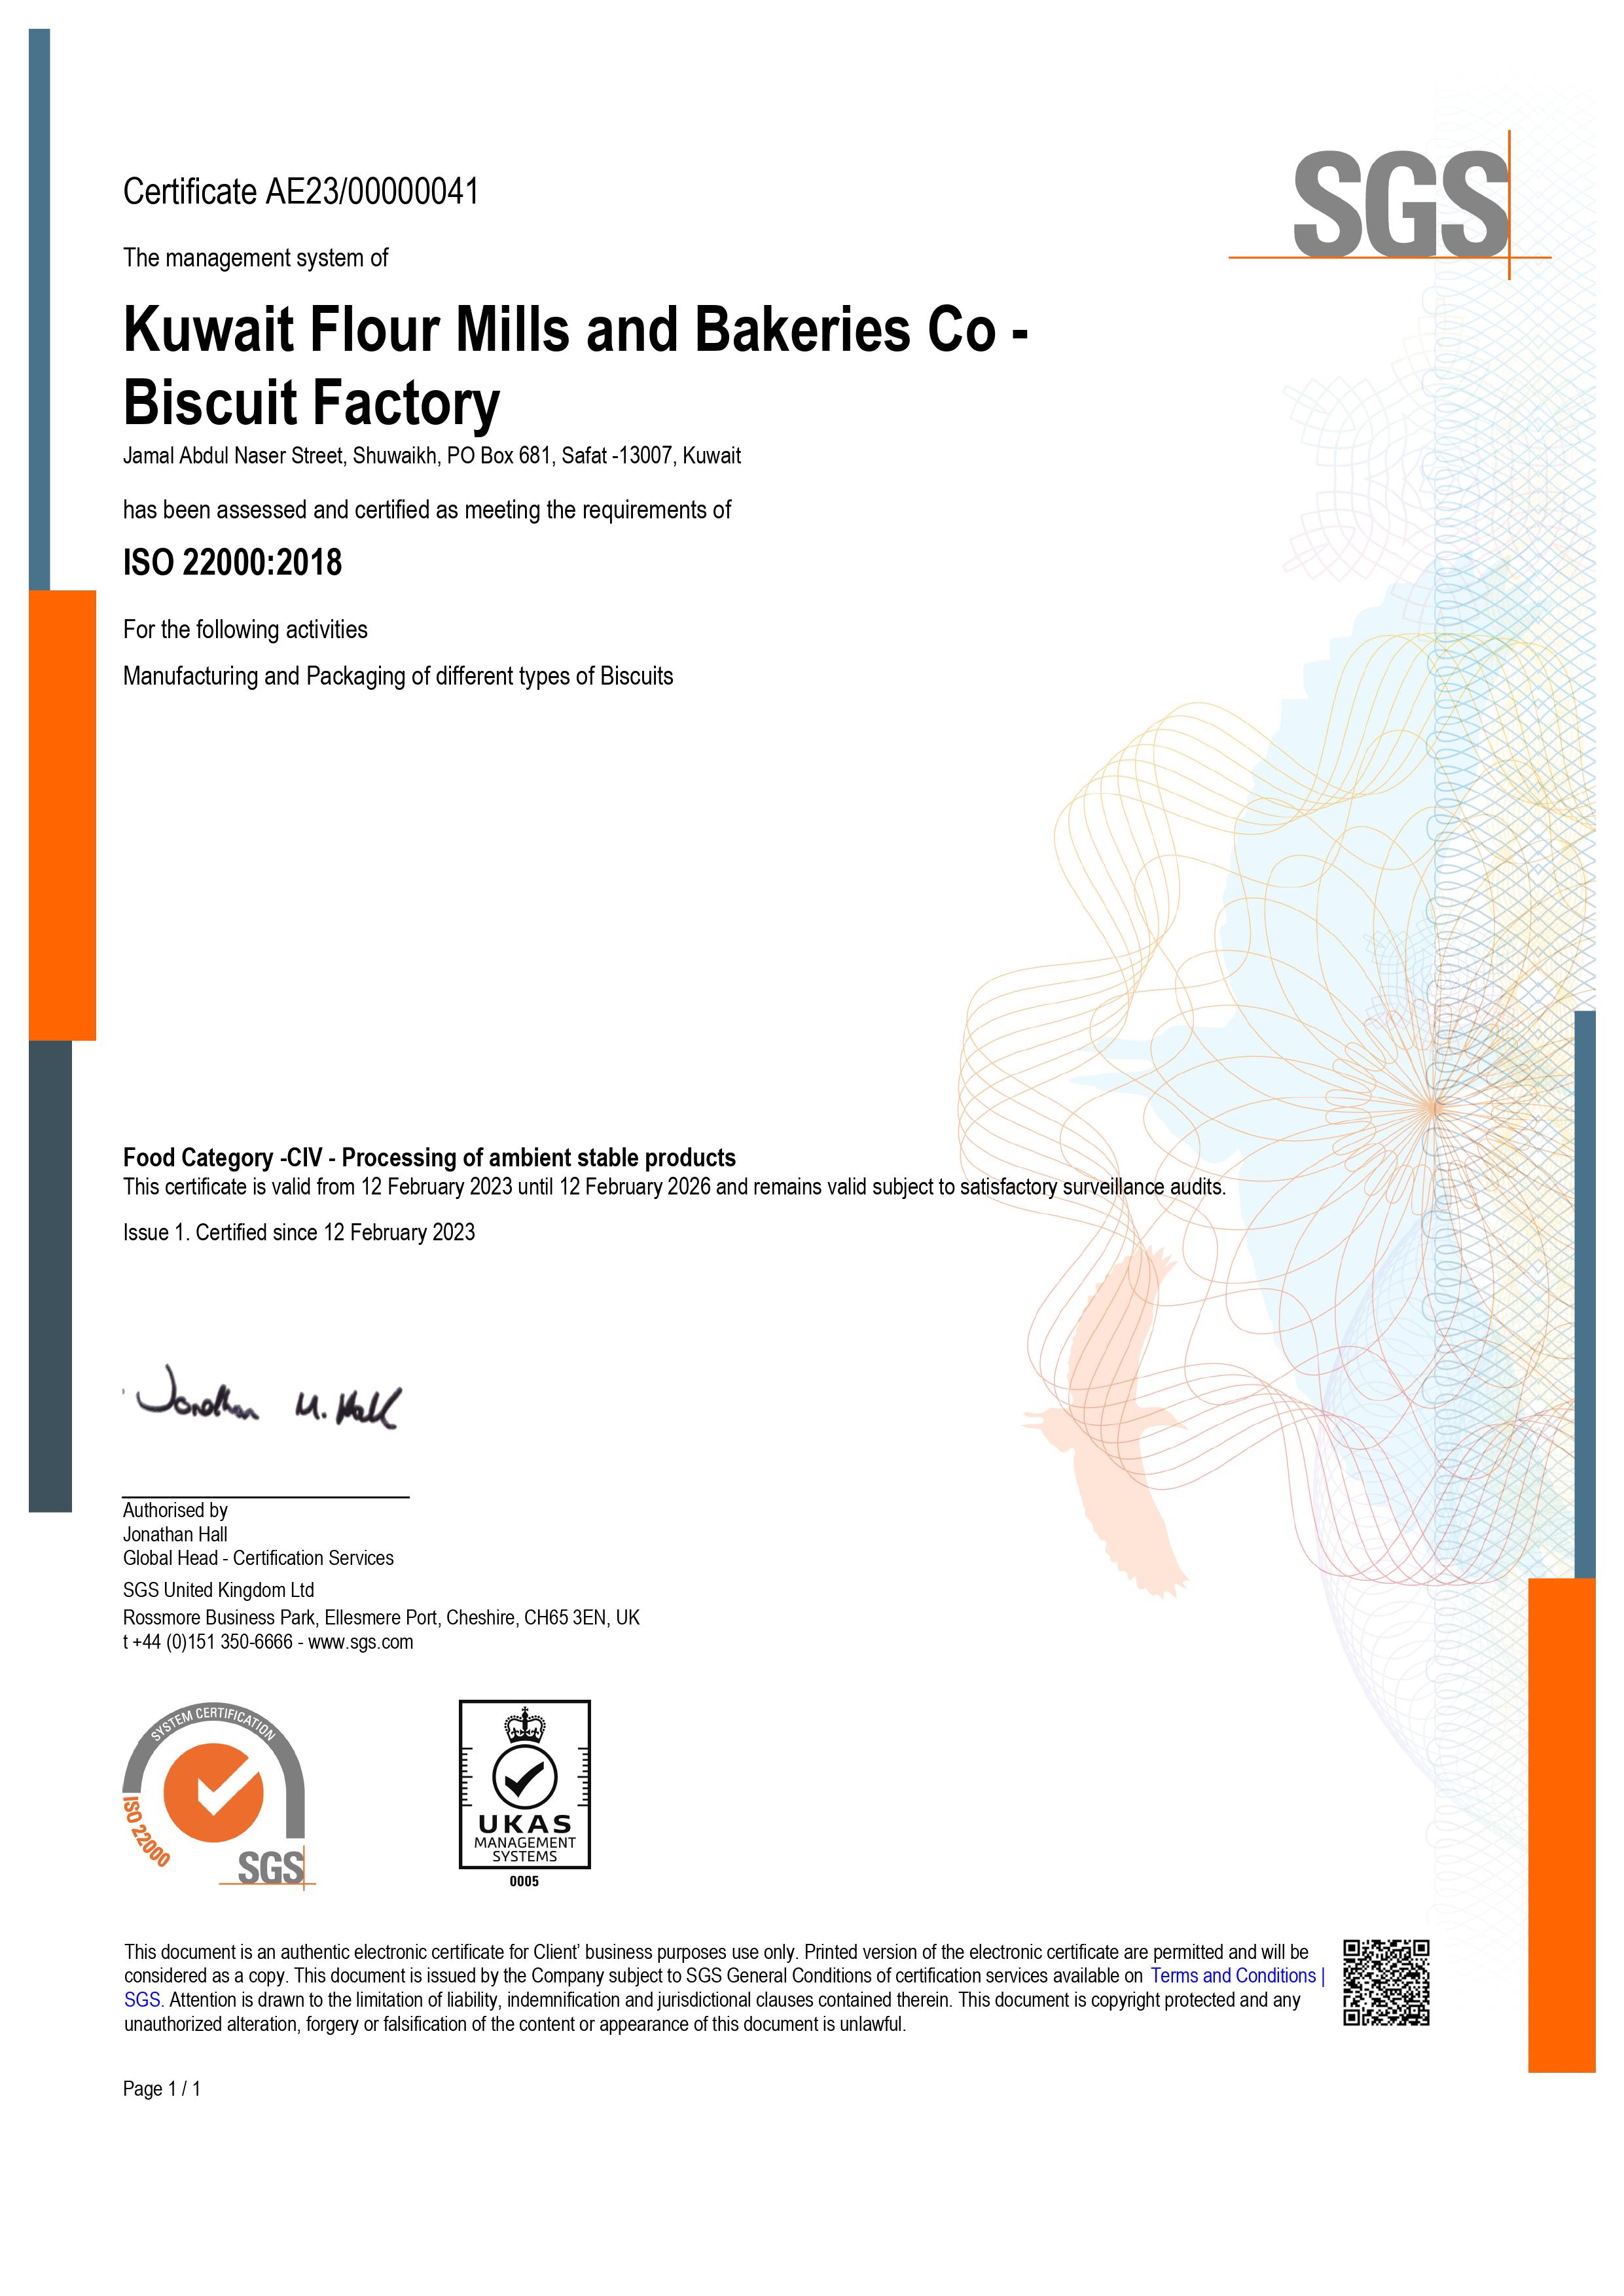 ISO 22000 - 2018 certification for Biscuit_valid till 2026